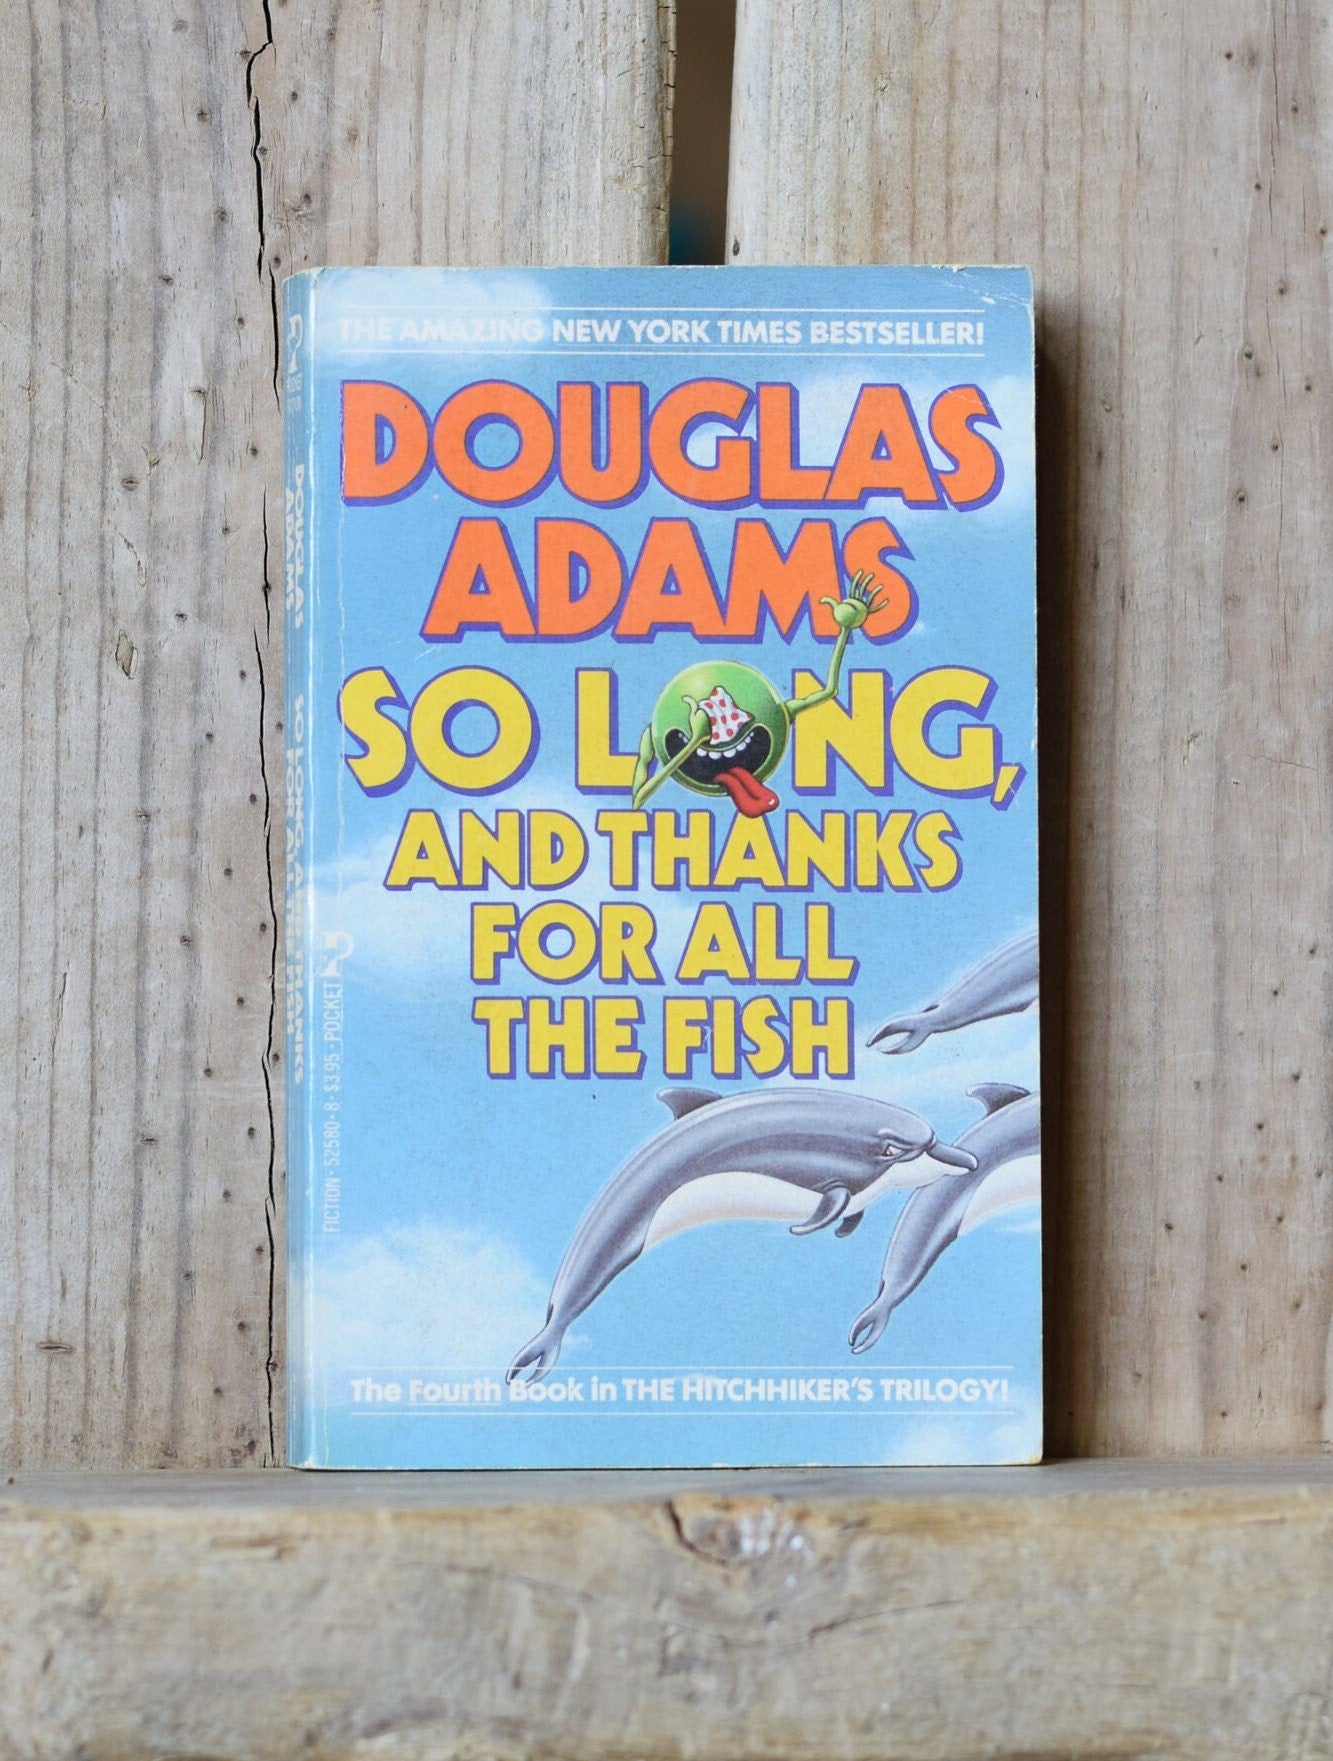 Vintage Fantasy Paperback Novel: Douglas Adams - So Long, and Thanks for All the Fish